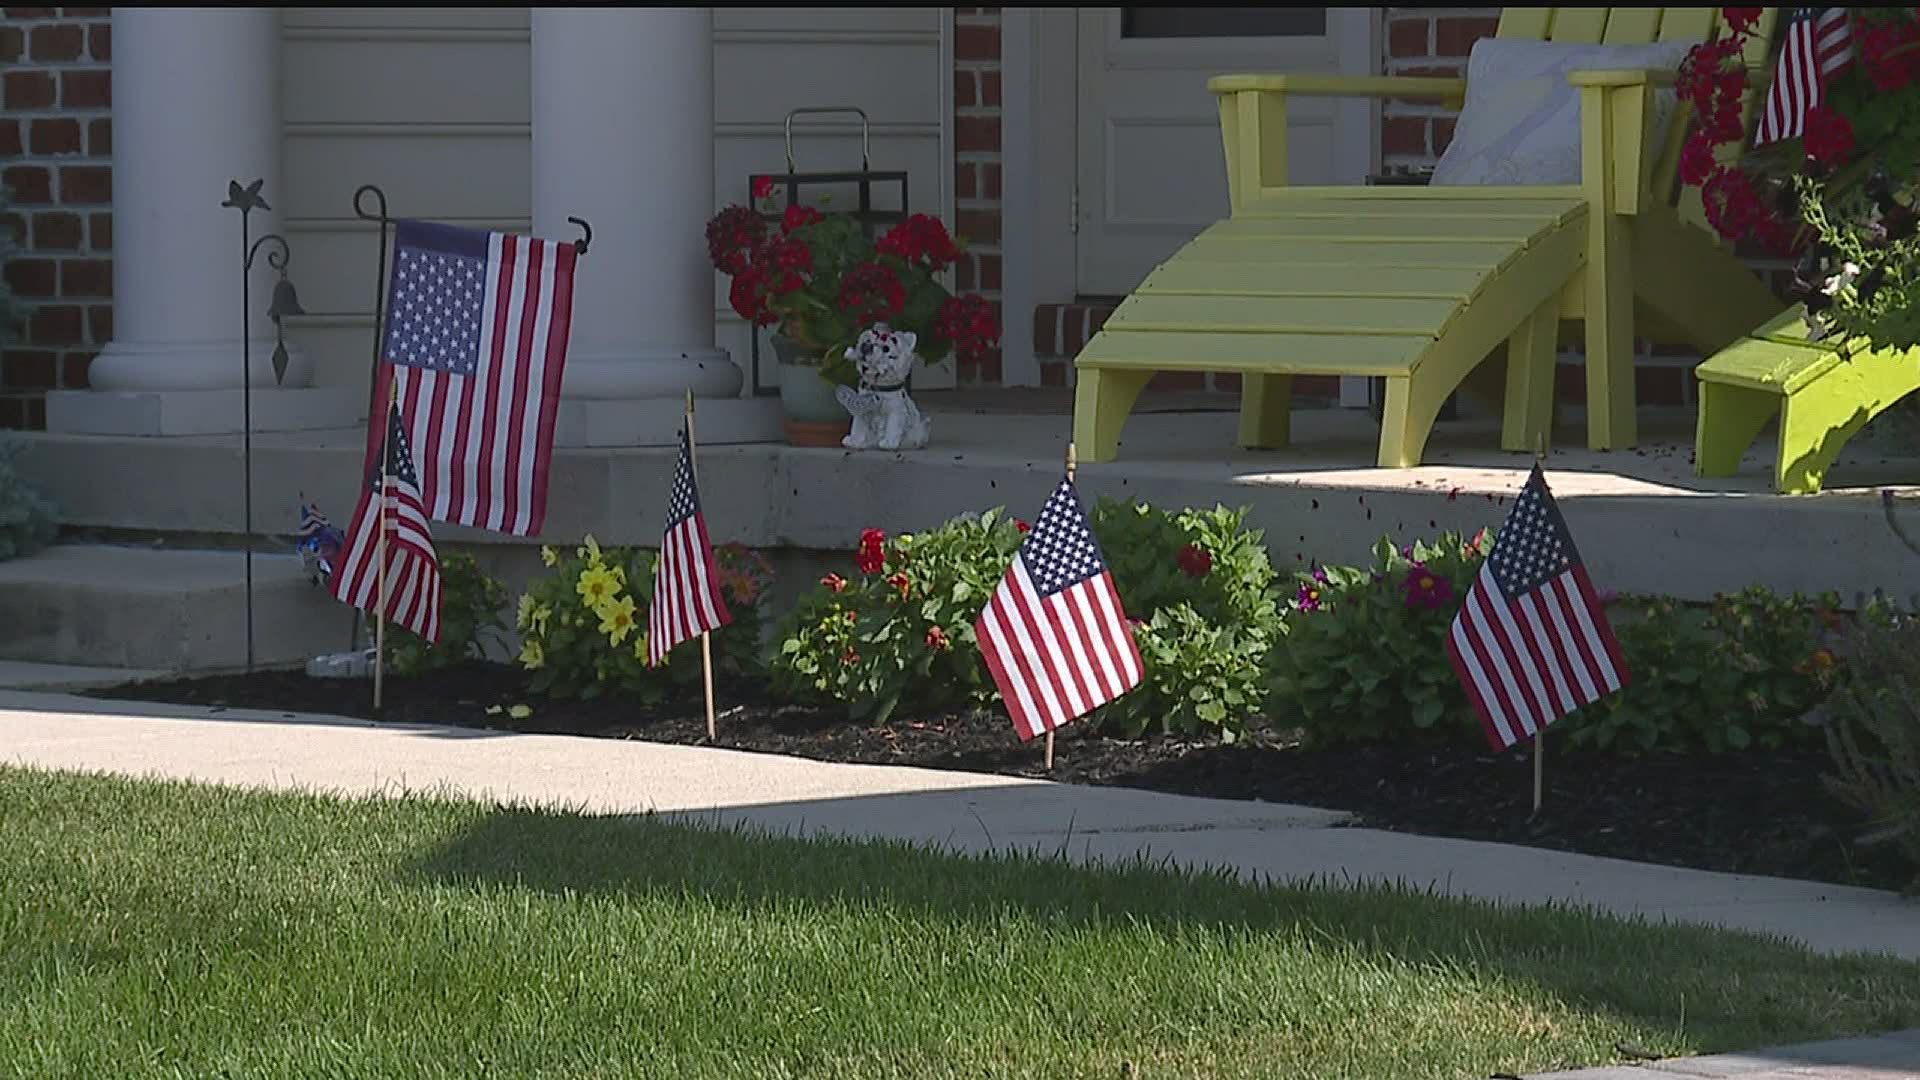 The neighborhood honored the nation by decorating with hundreds of flags.